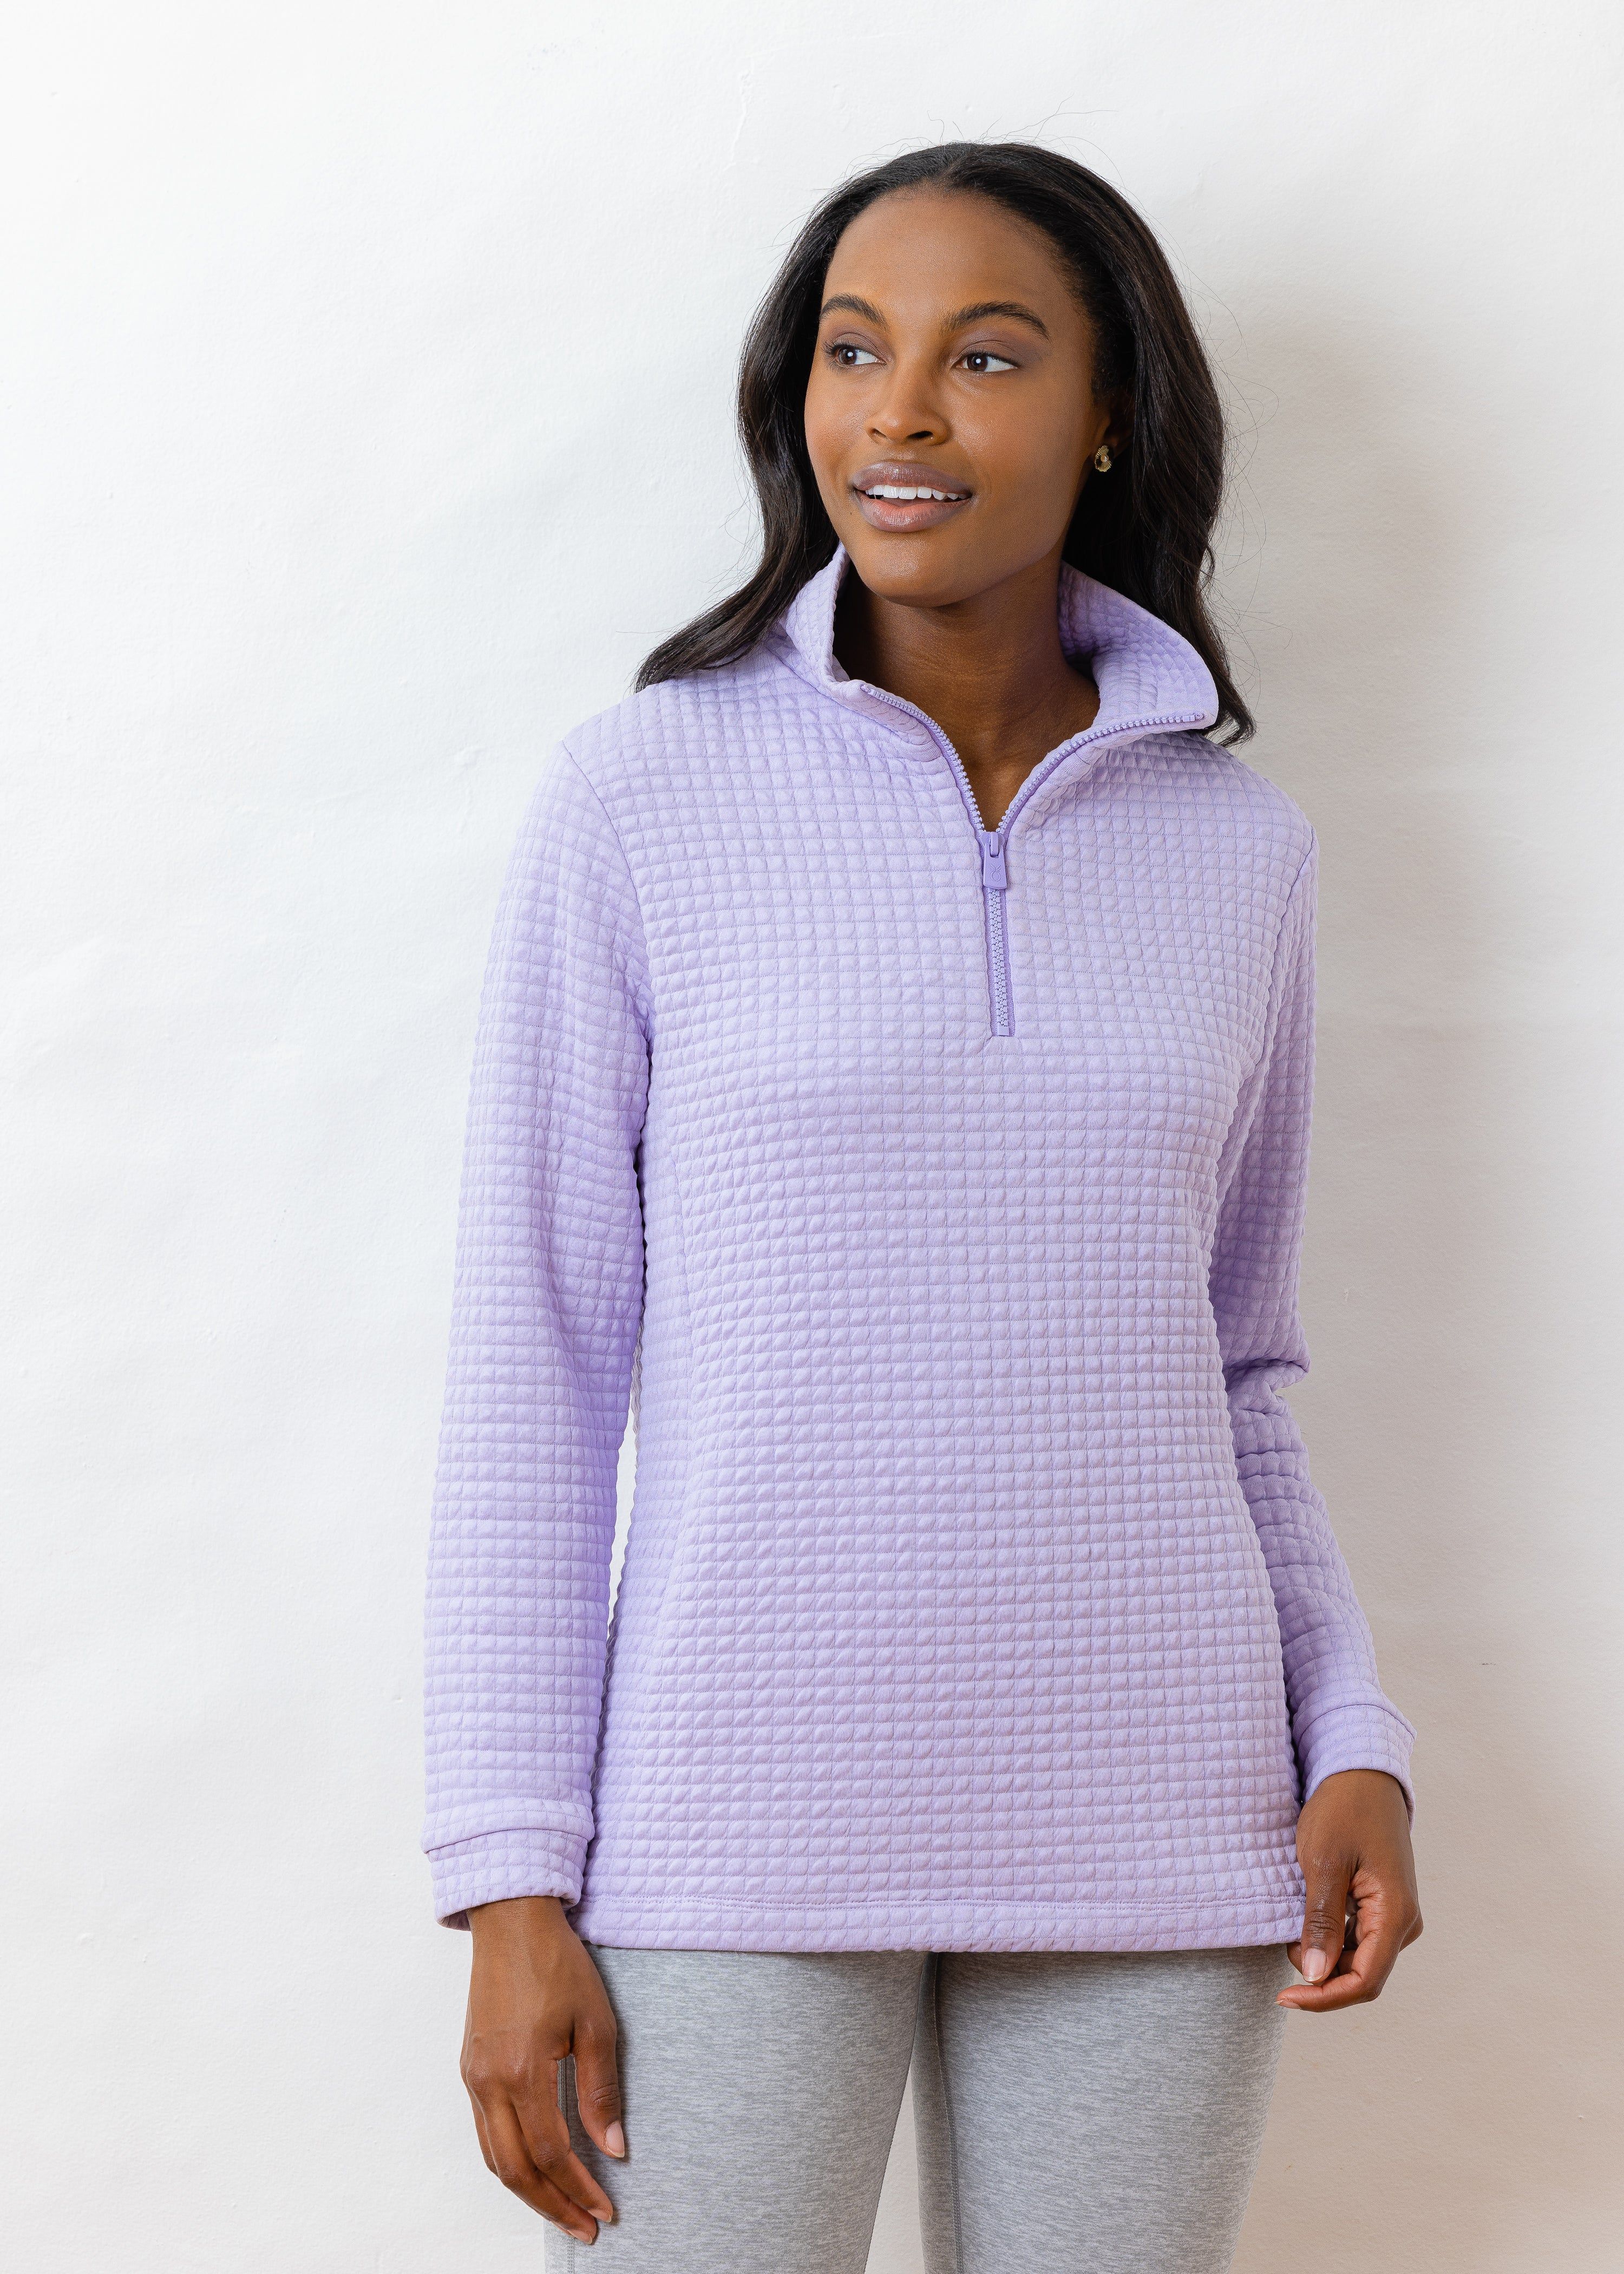 Pocomo Pullover in Waffle Jersey (Lavender) | Dudley Stephens